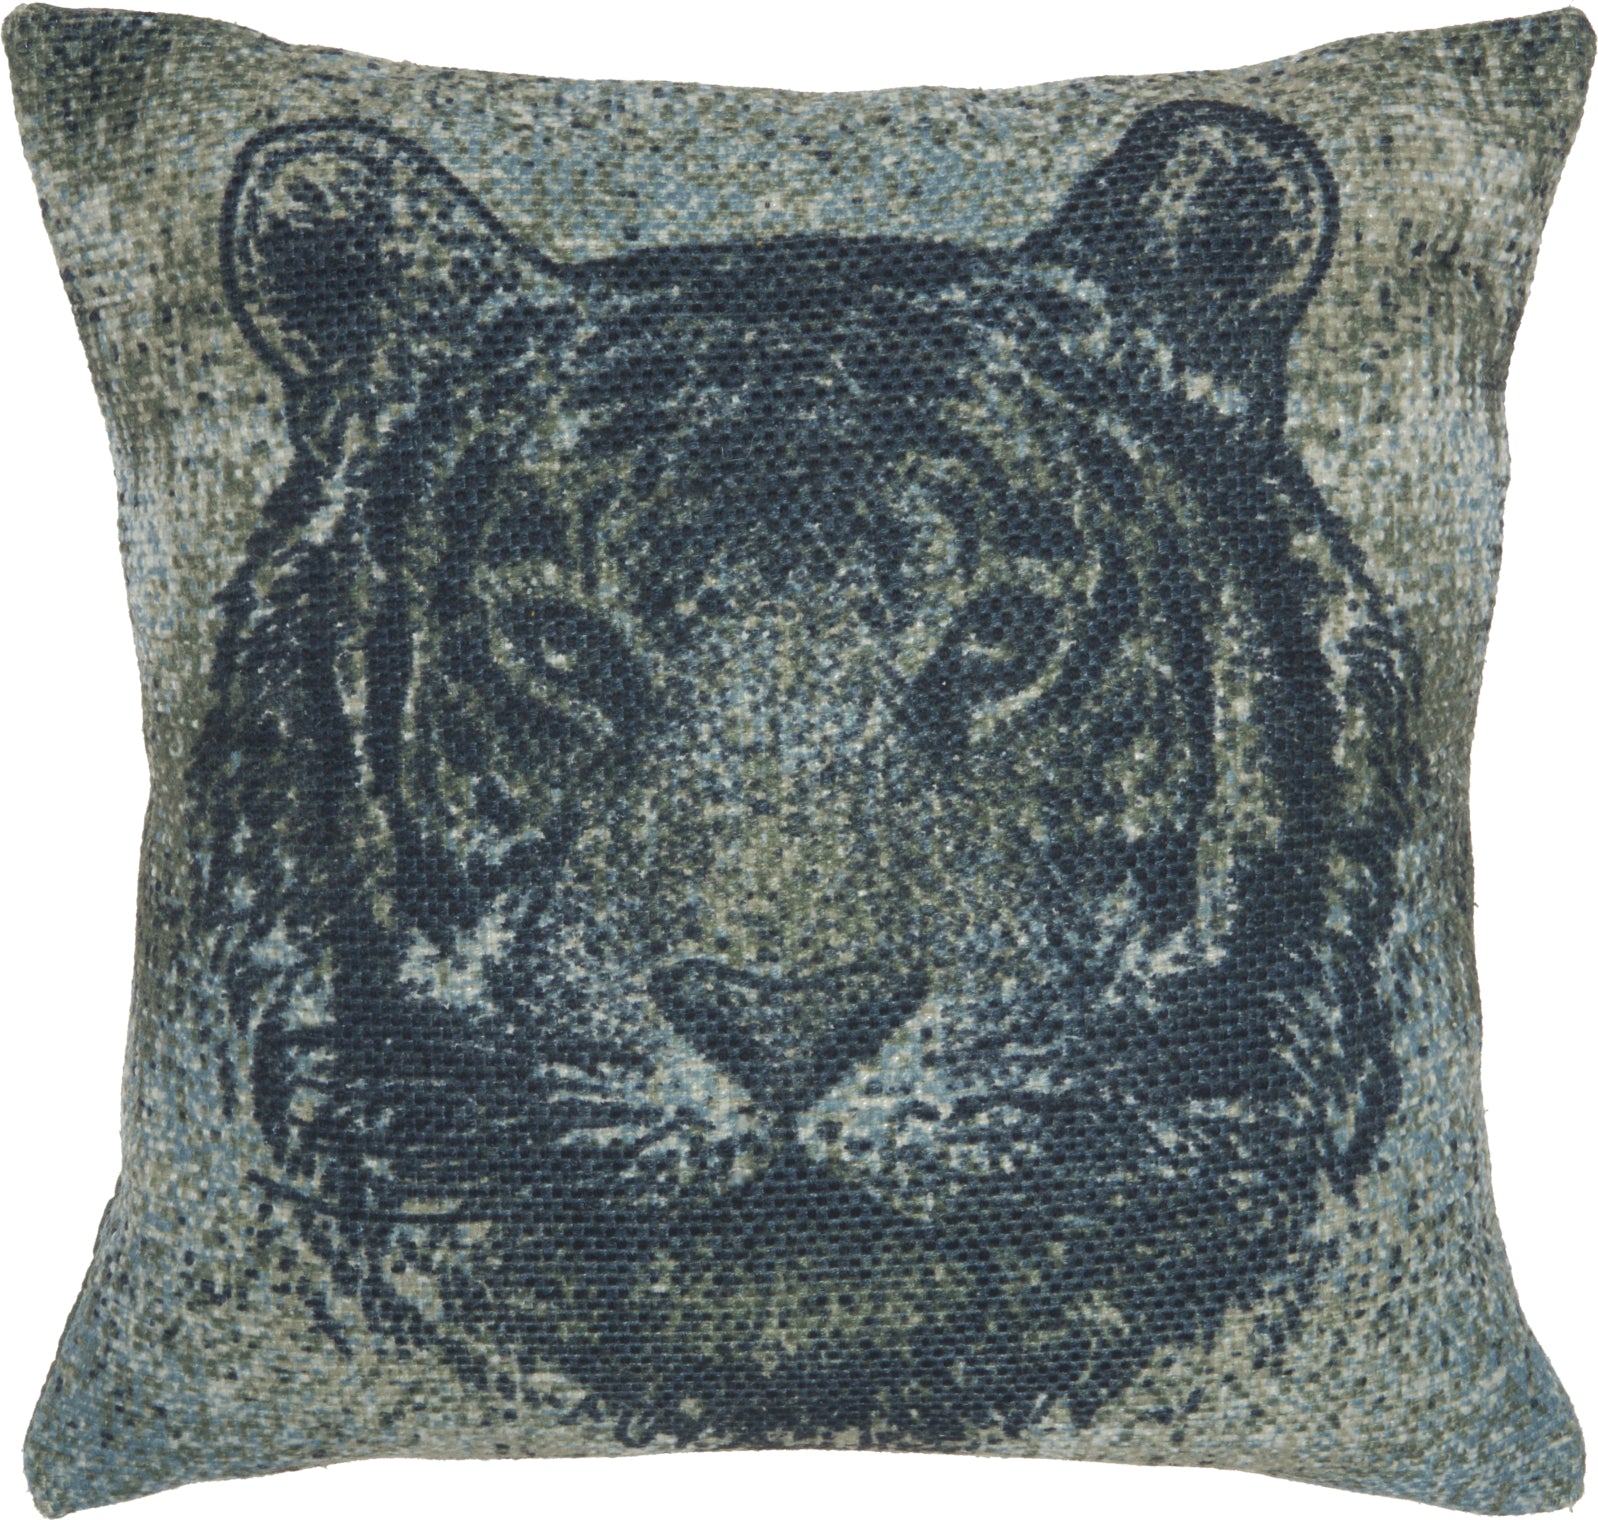 Nourison Outdoor Pillows Tiger Multicolor by Mina Victory main image